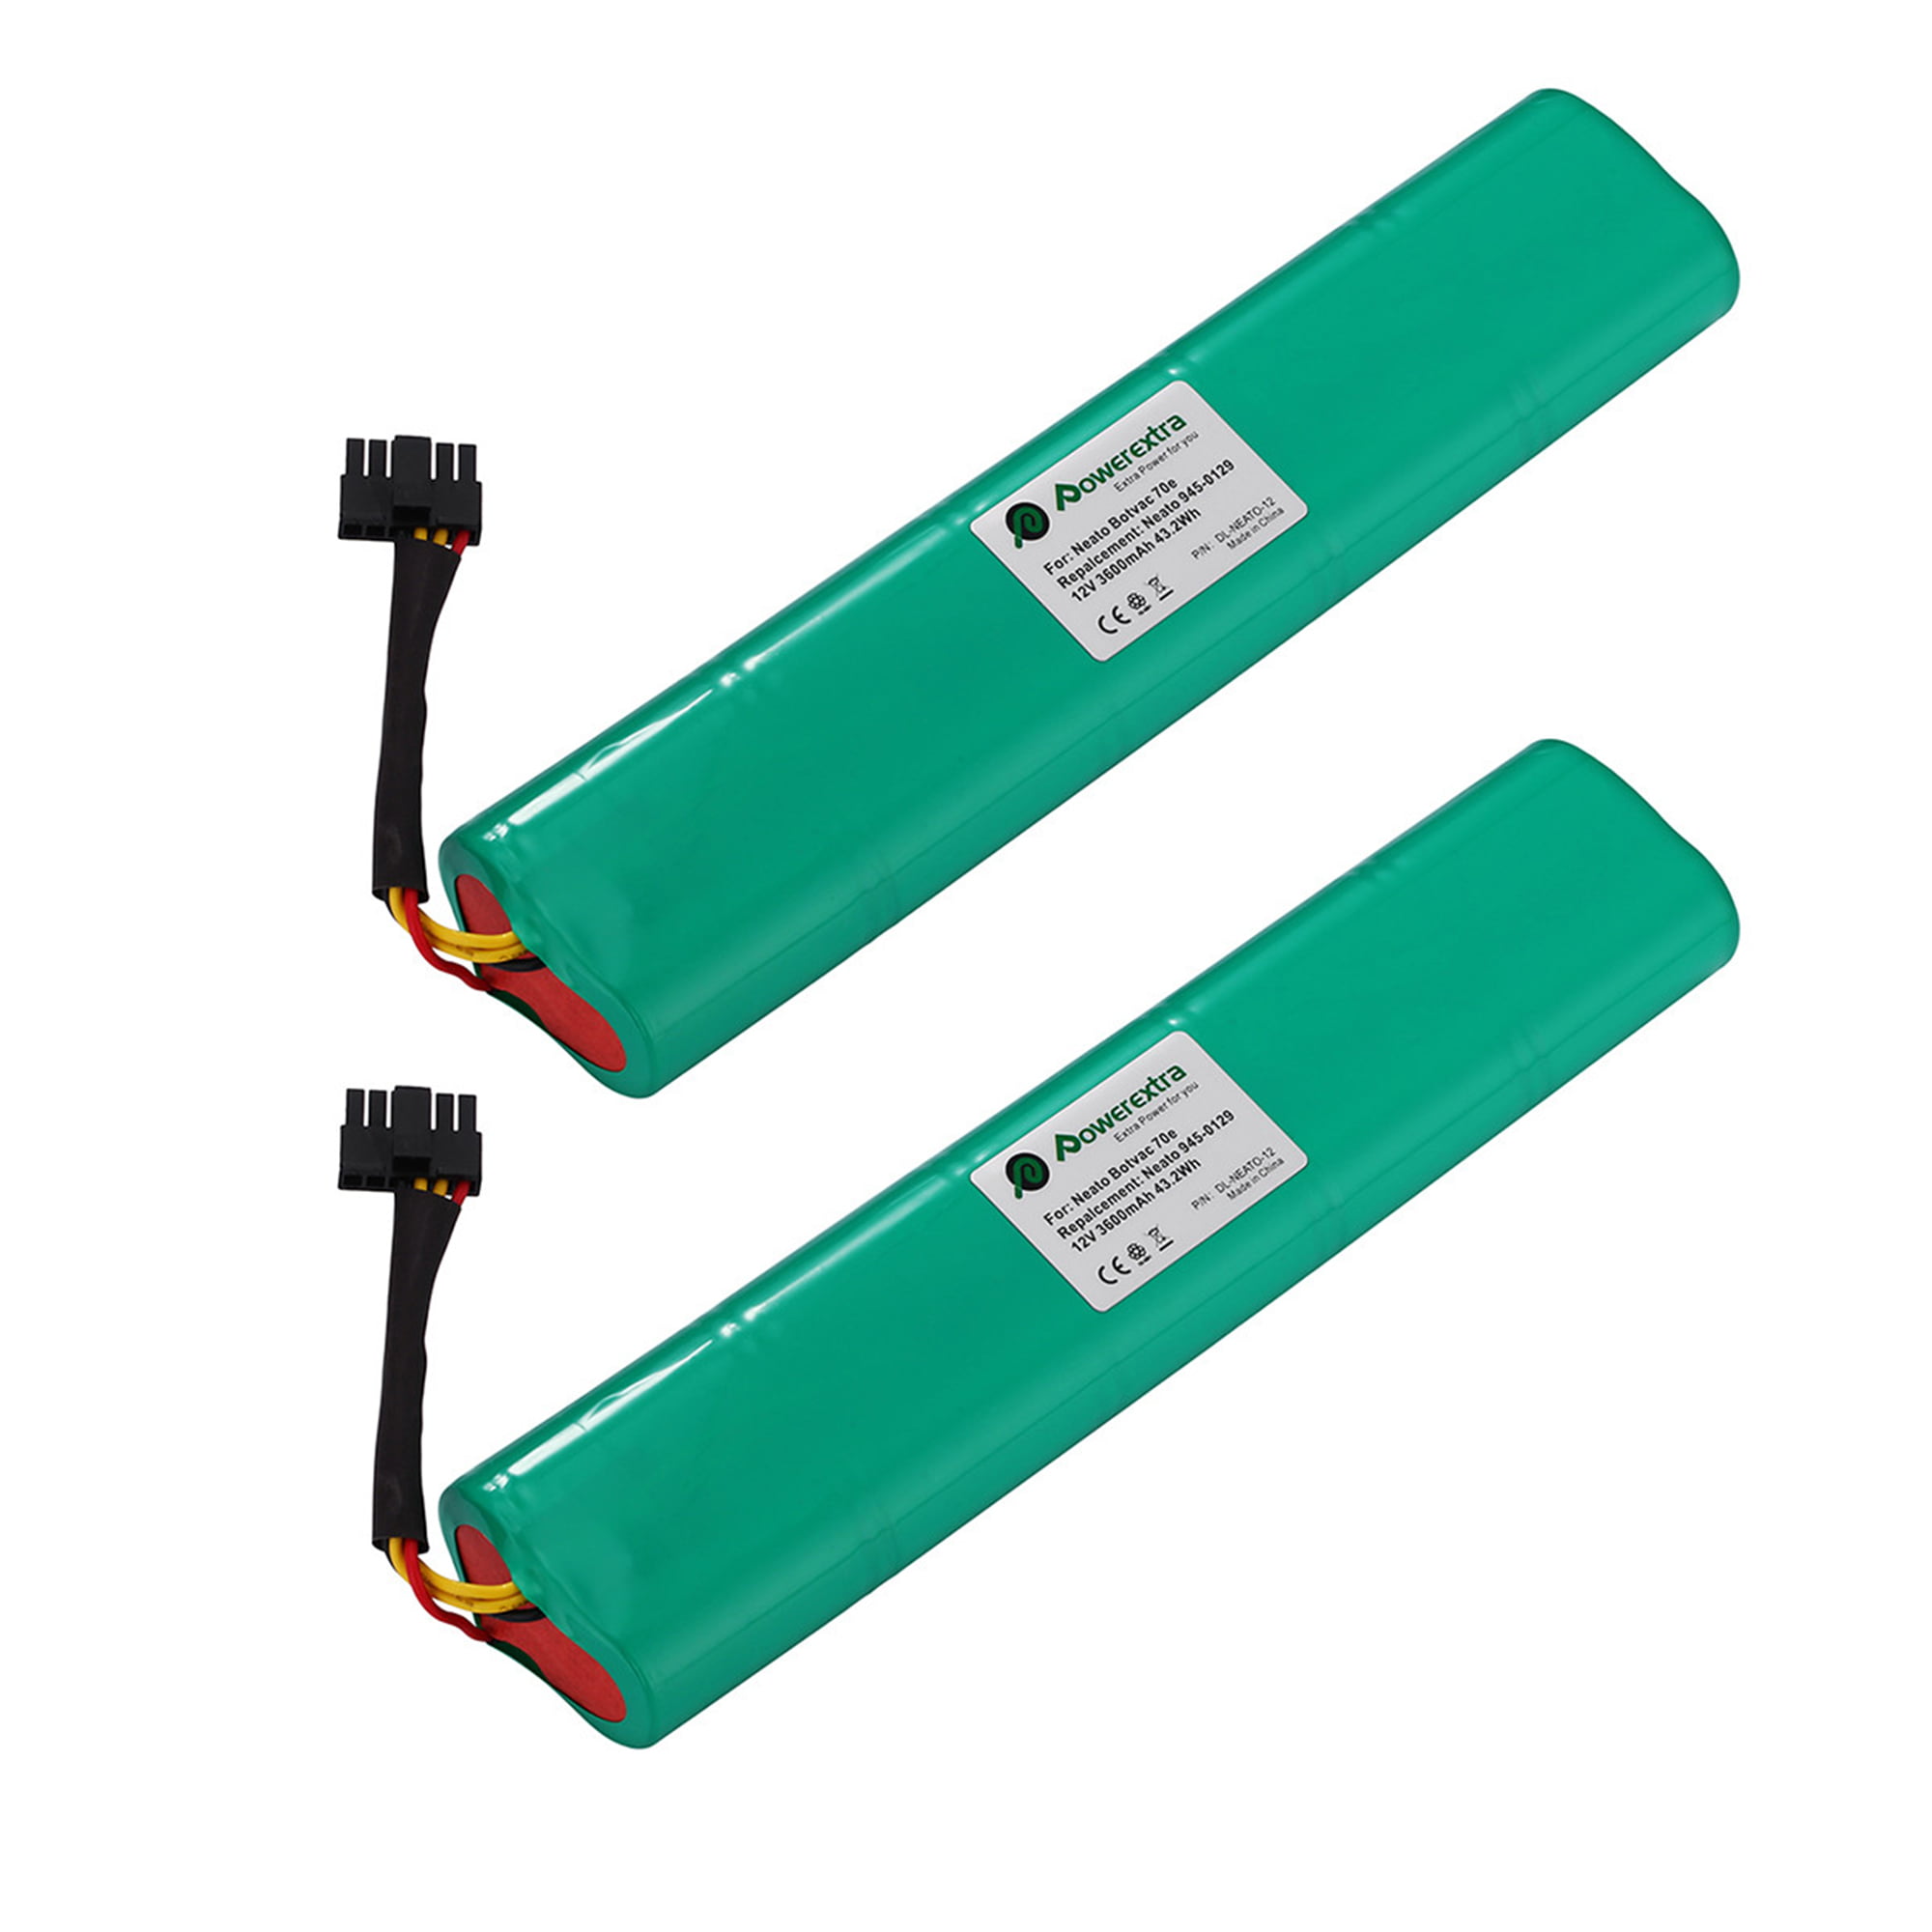 Neato Replacement Batteries for XV Series 1.50 x 5.00 x 2.75 inches 